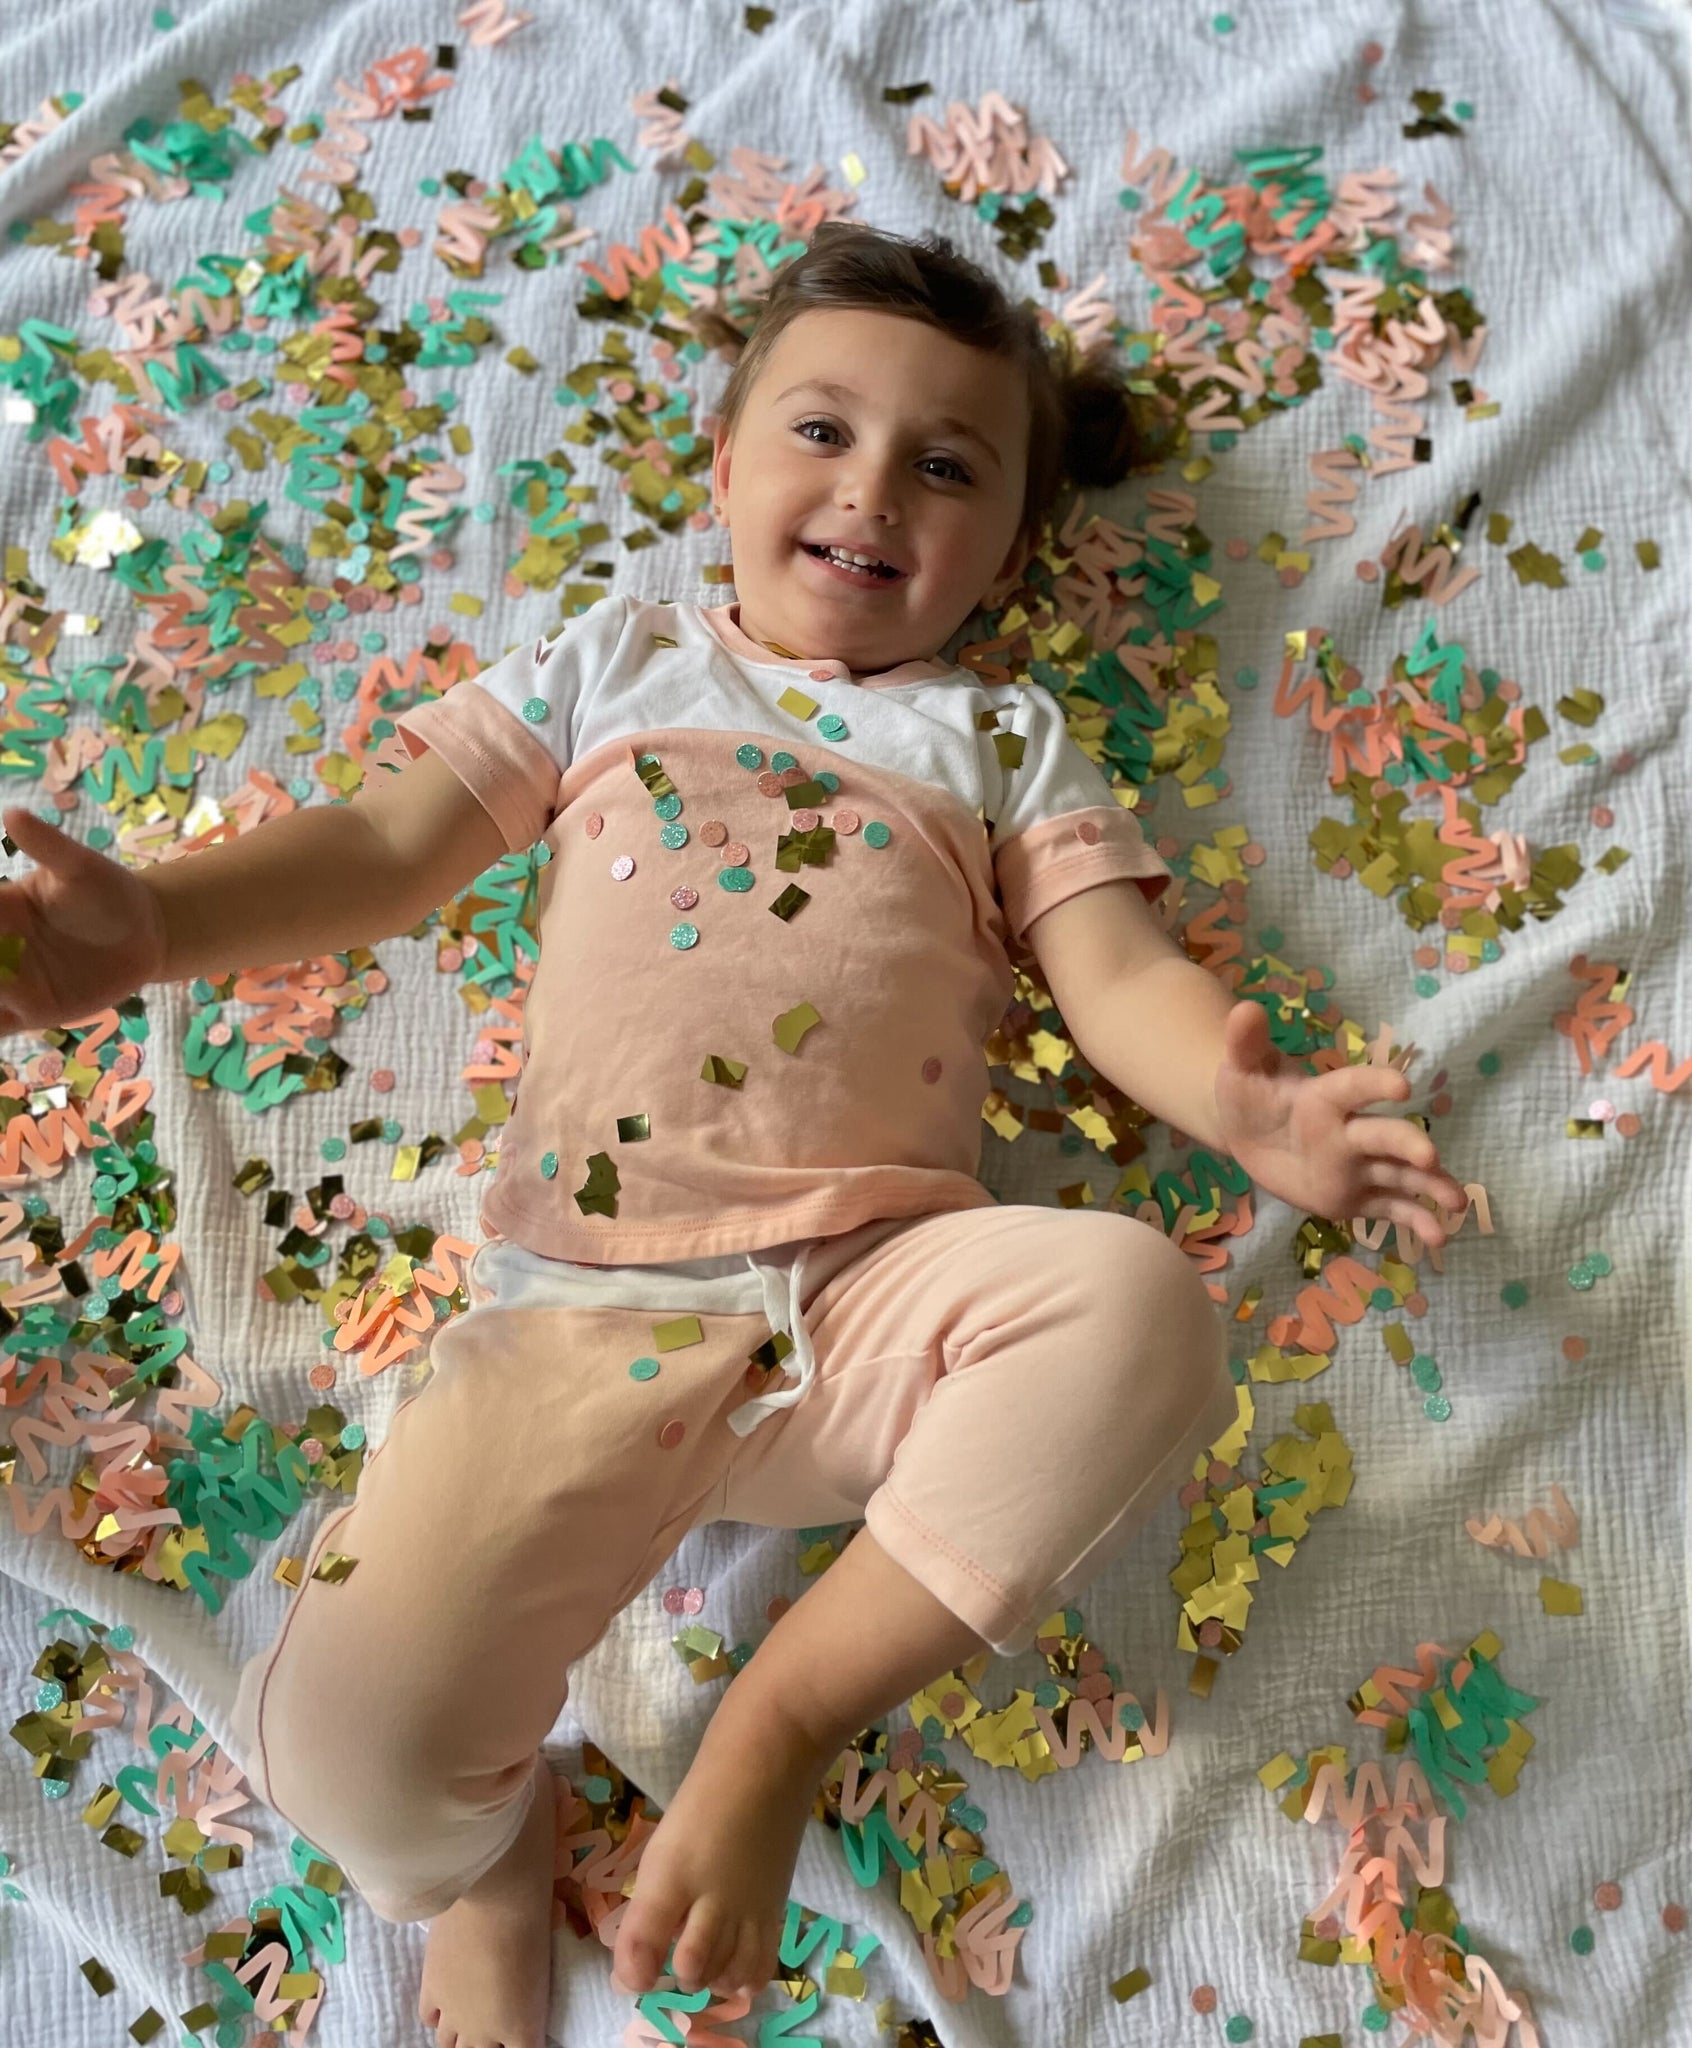 Celebrating One Year of Hip Bambino: Our Journey to Providing High-Quality Baby Clothing and Accessories